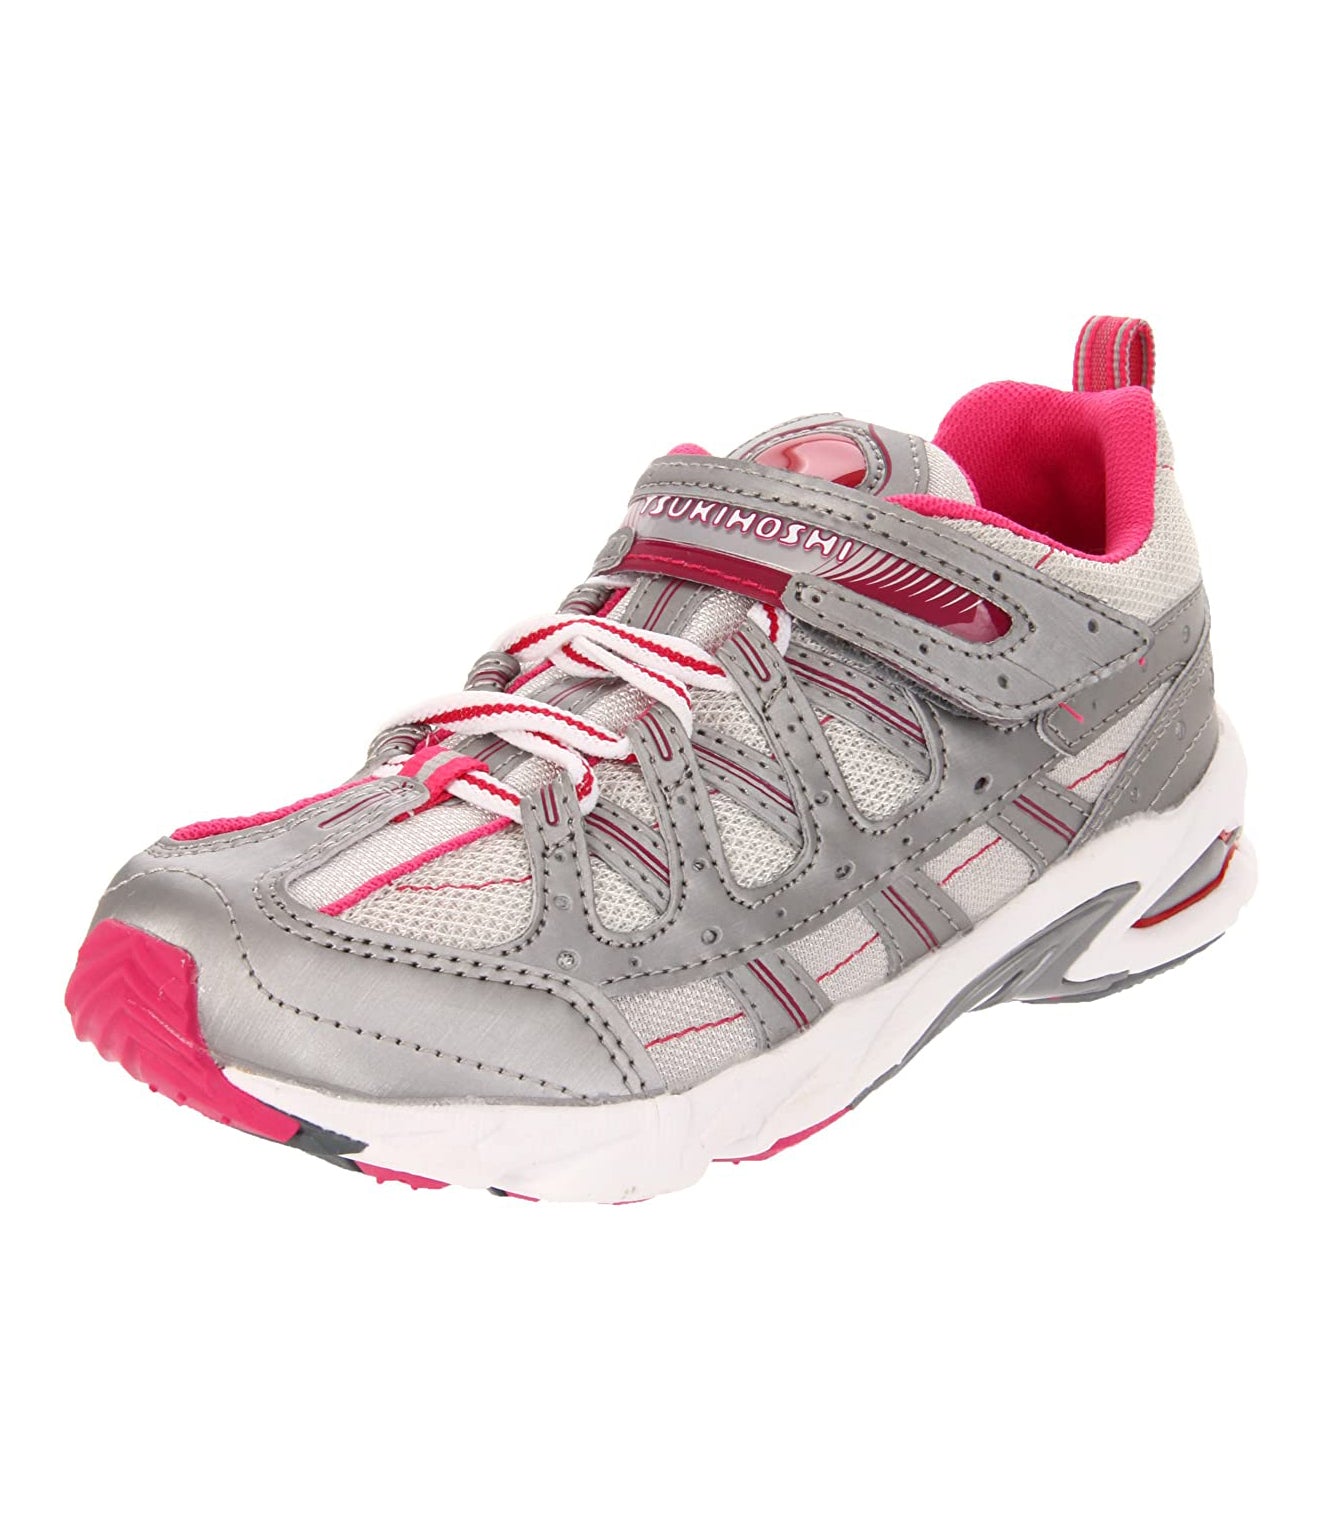 Youth Tsukihoshi Speed Sneaker in Silver/Raspberry from the front view